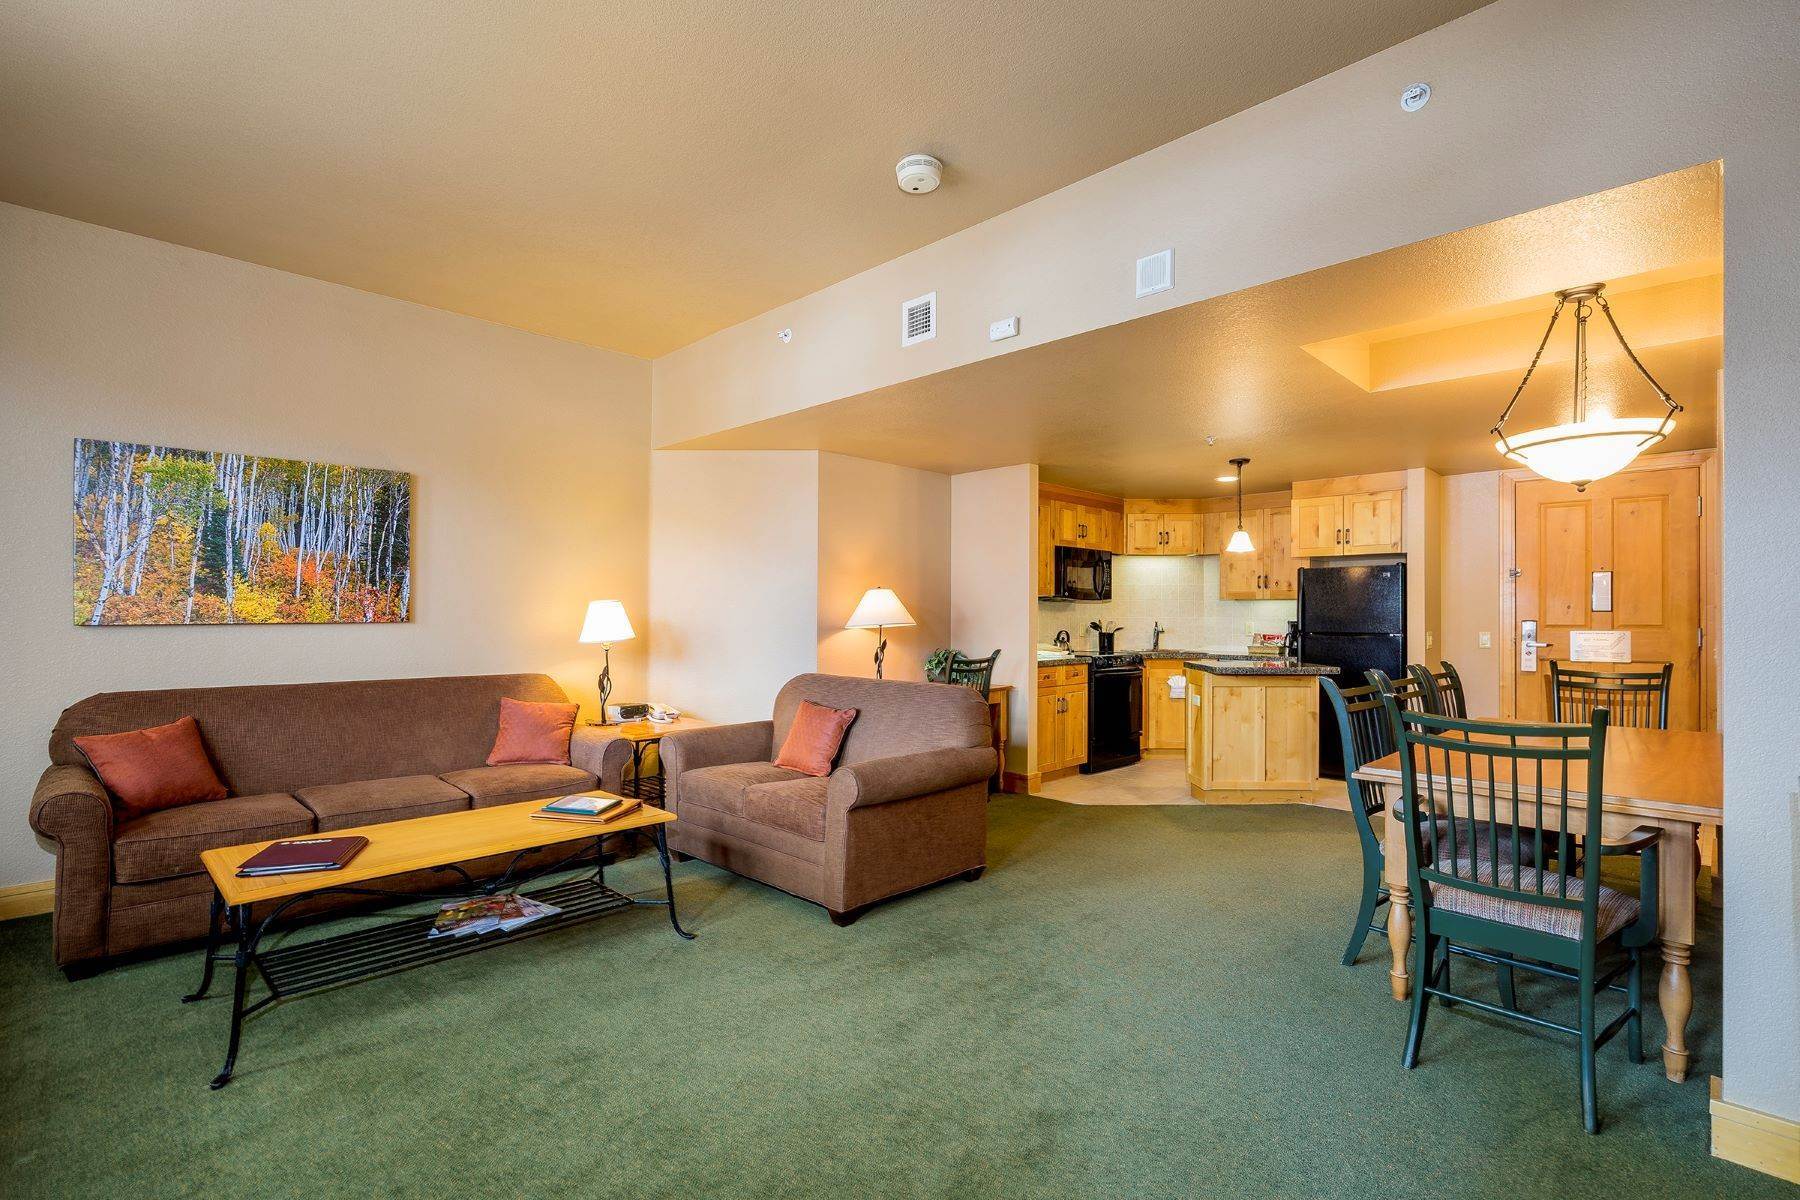 4. fractional ownership prop for Sale at Home Away from Home - Steamboat Grand 2300 Mt. Werner Circle 652 QII Steamboat Springs, Colorado 80487 United States